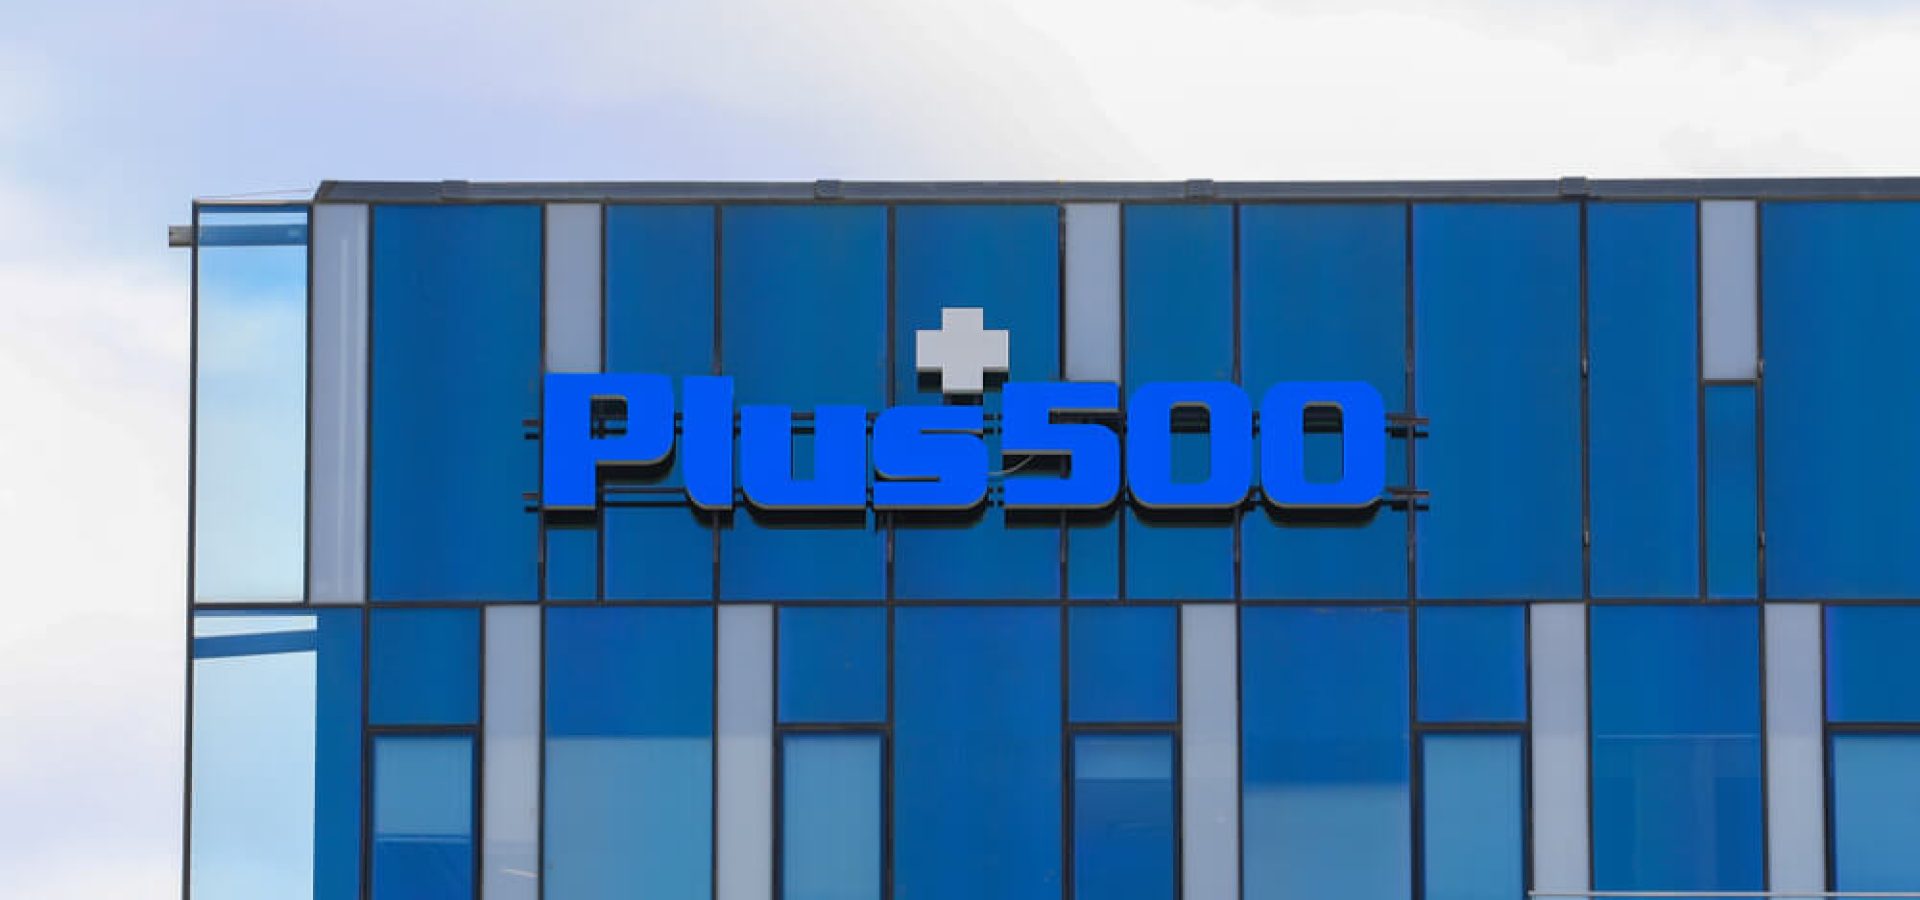 Plus500 logo sign on the office building.